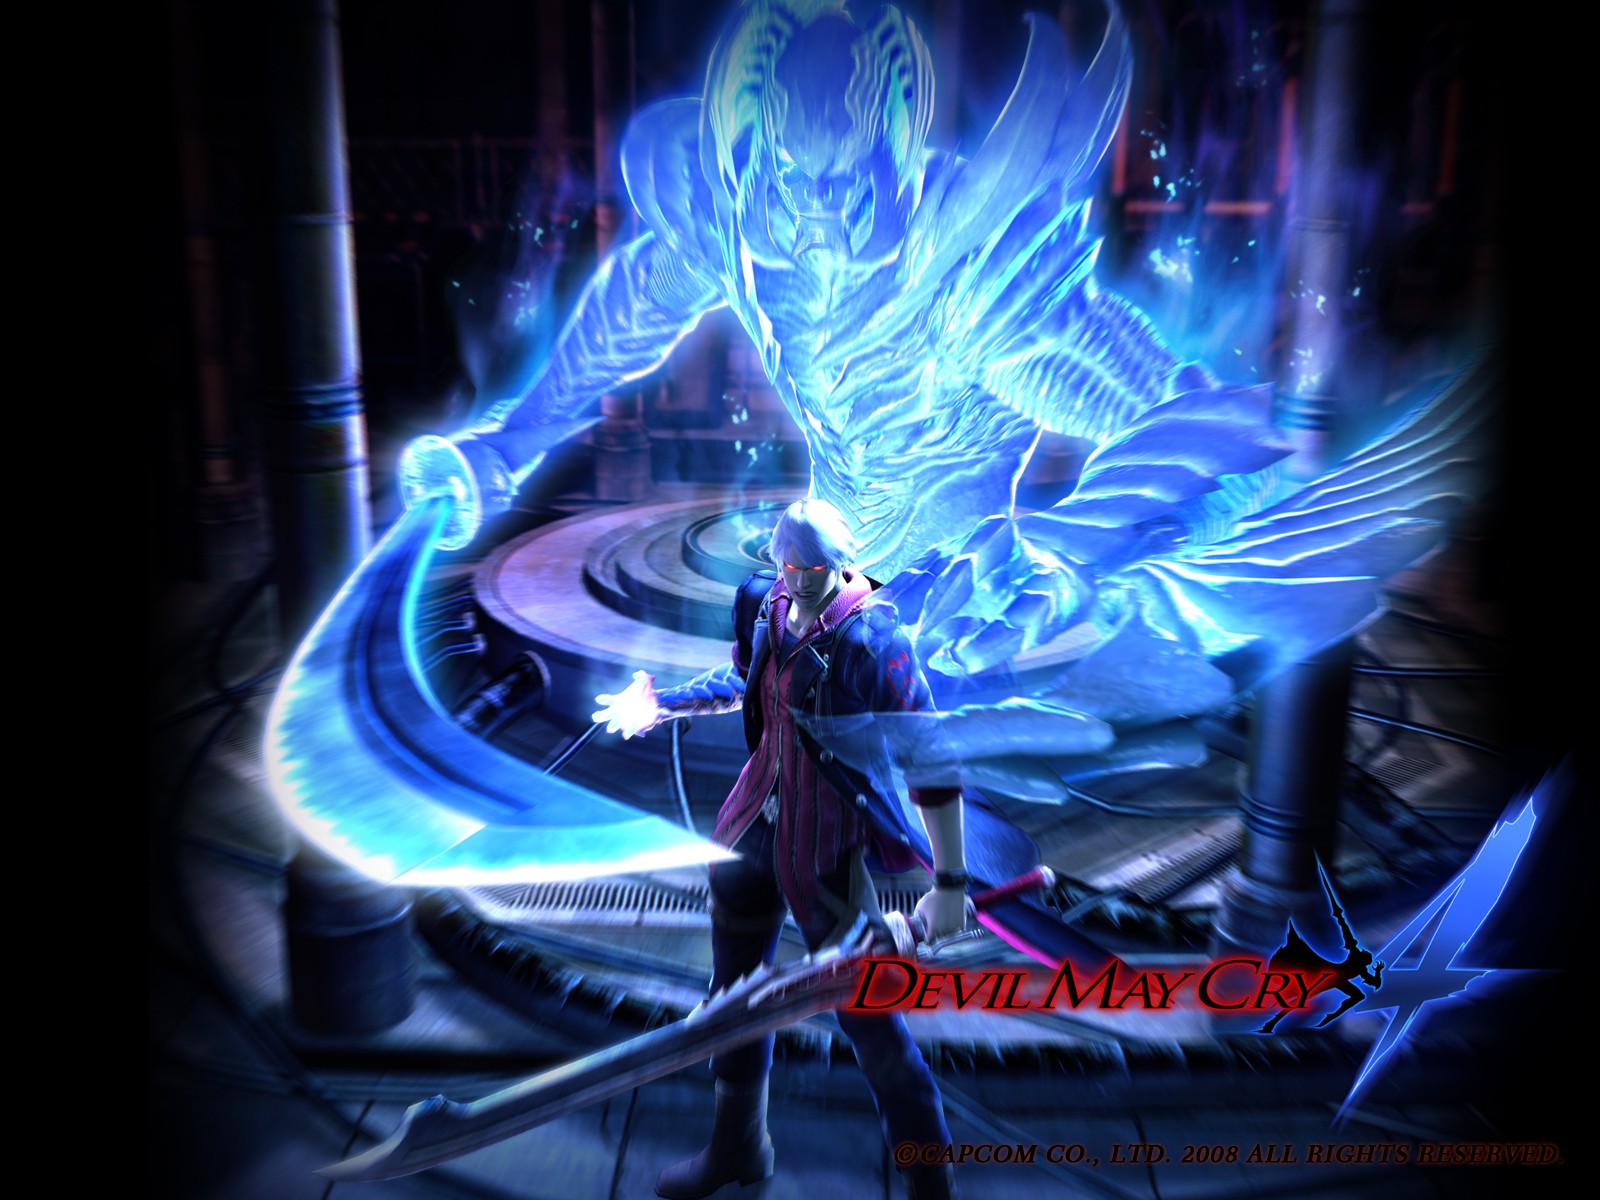 The Devil May Cry4 devil may cry 4 wallpaper wp20080208 1